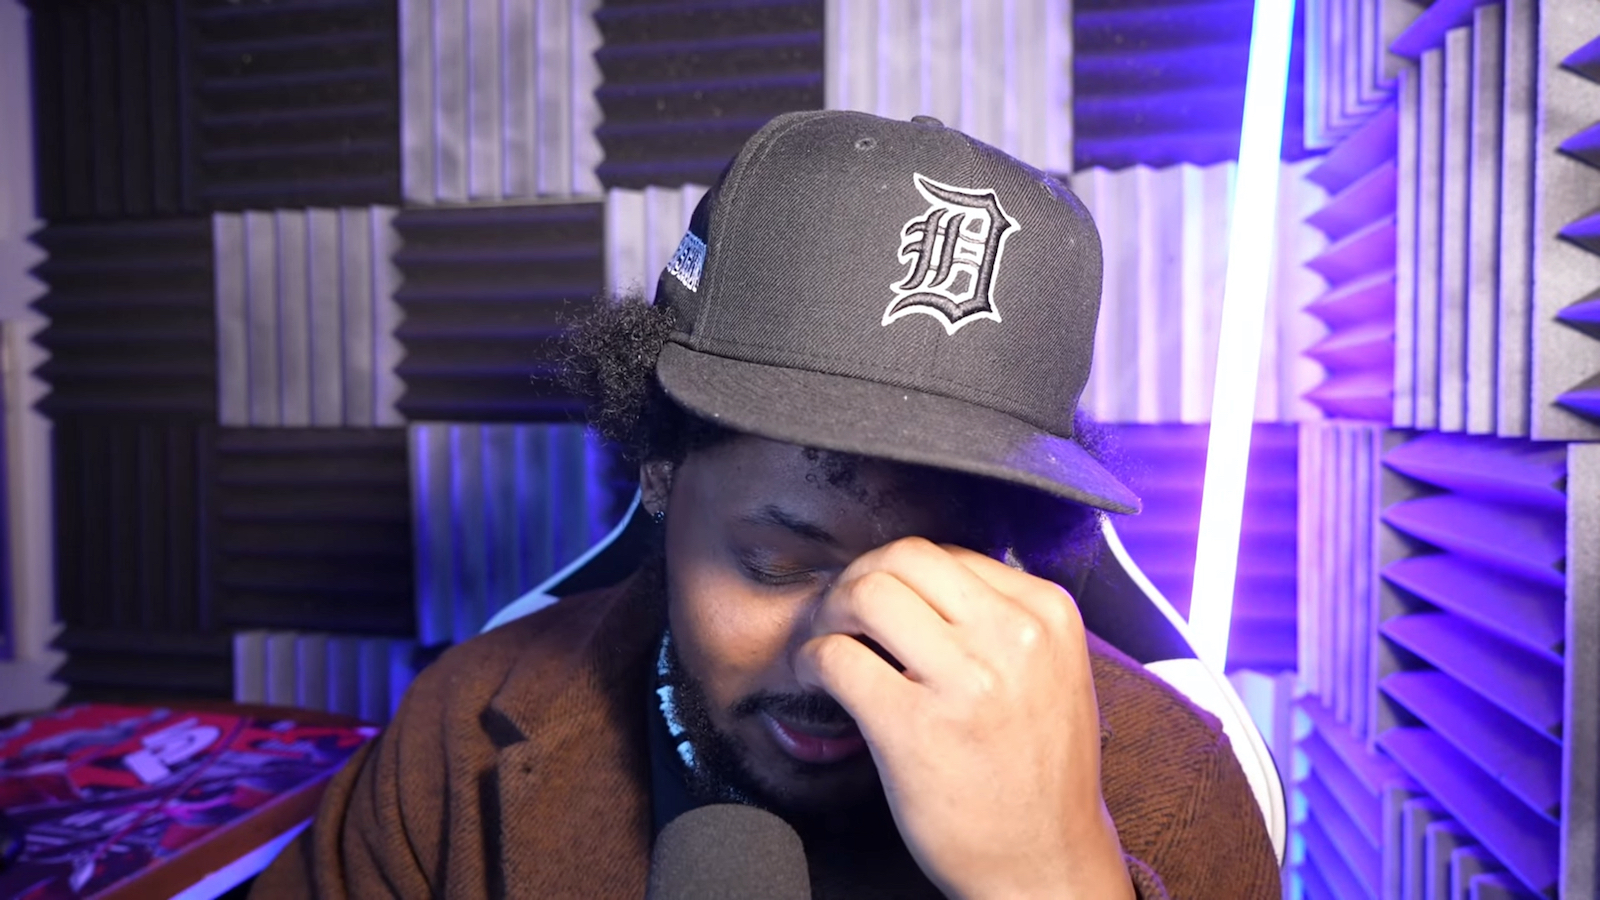 CoryxKenshin in a flat billed hat, pinching his nose, and looking down